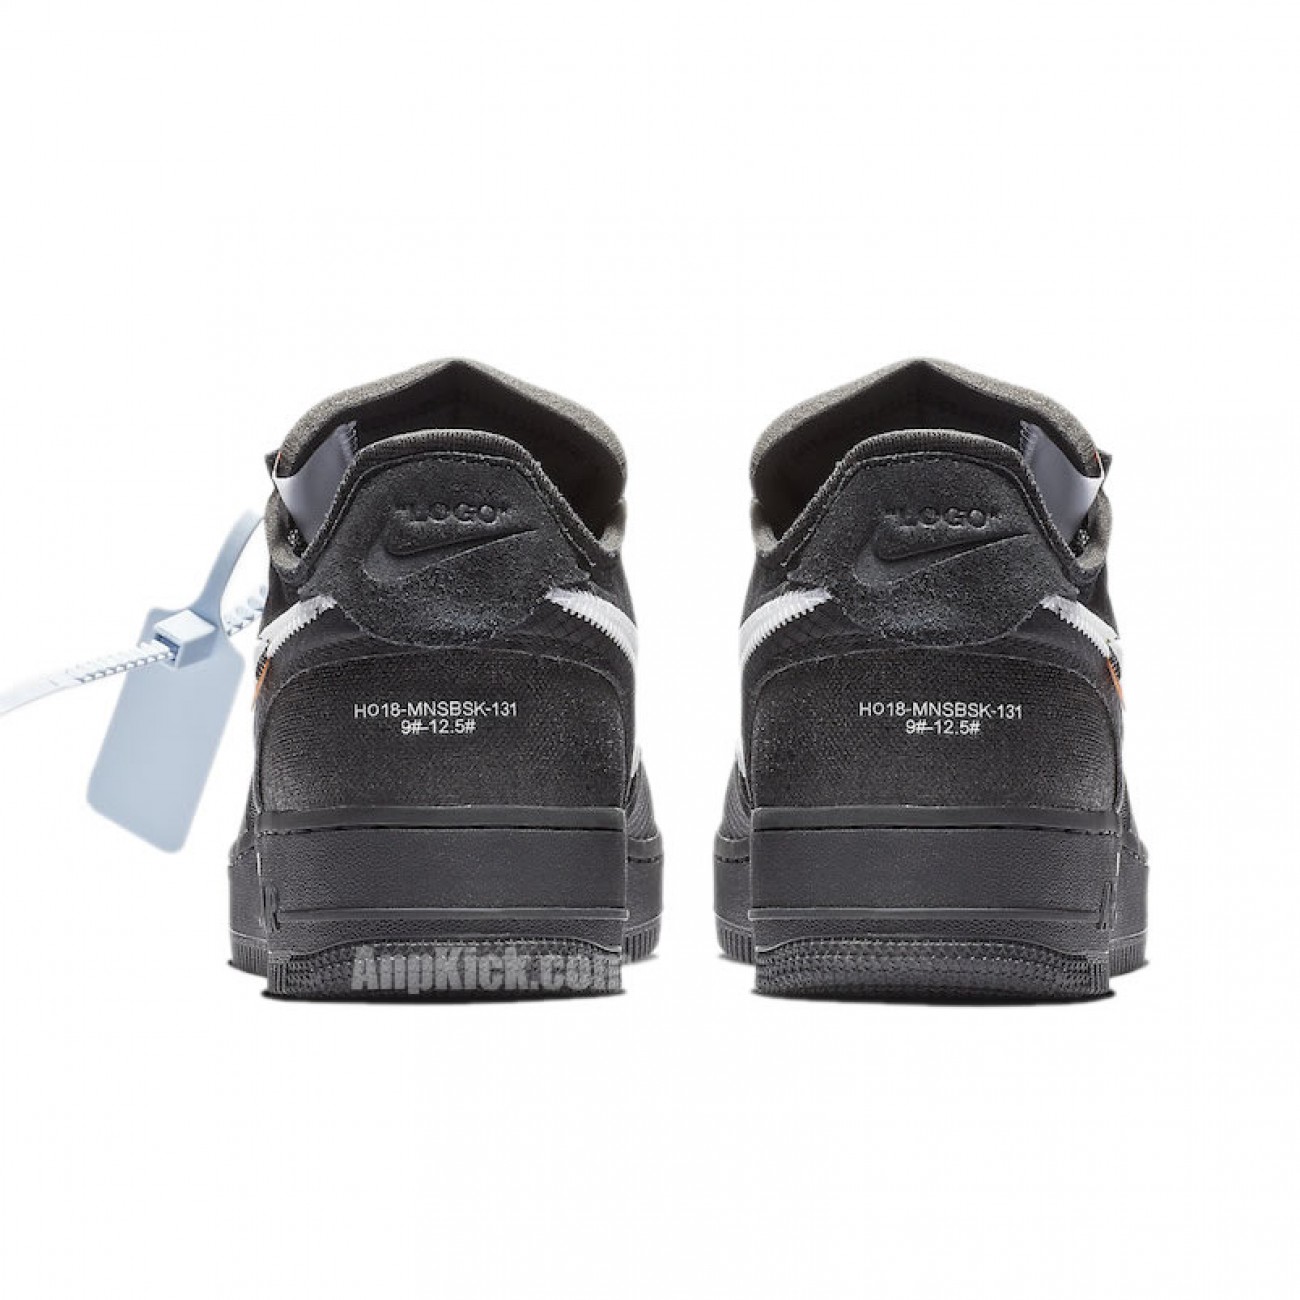 Off-White x Nike Air Force 1 Low "Black/White" Shoes AO4606-001